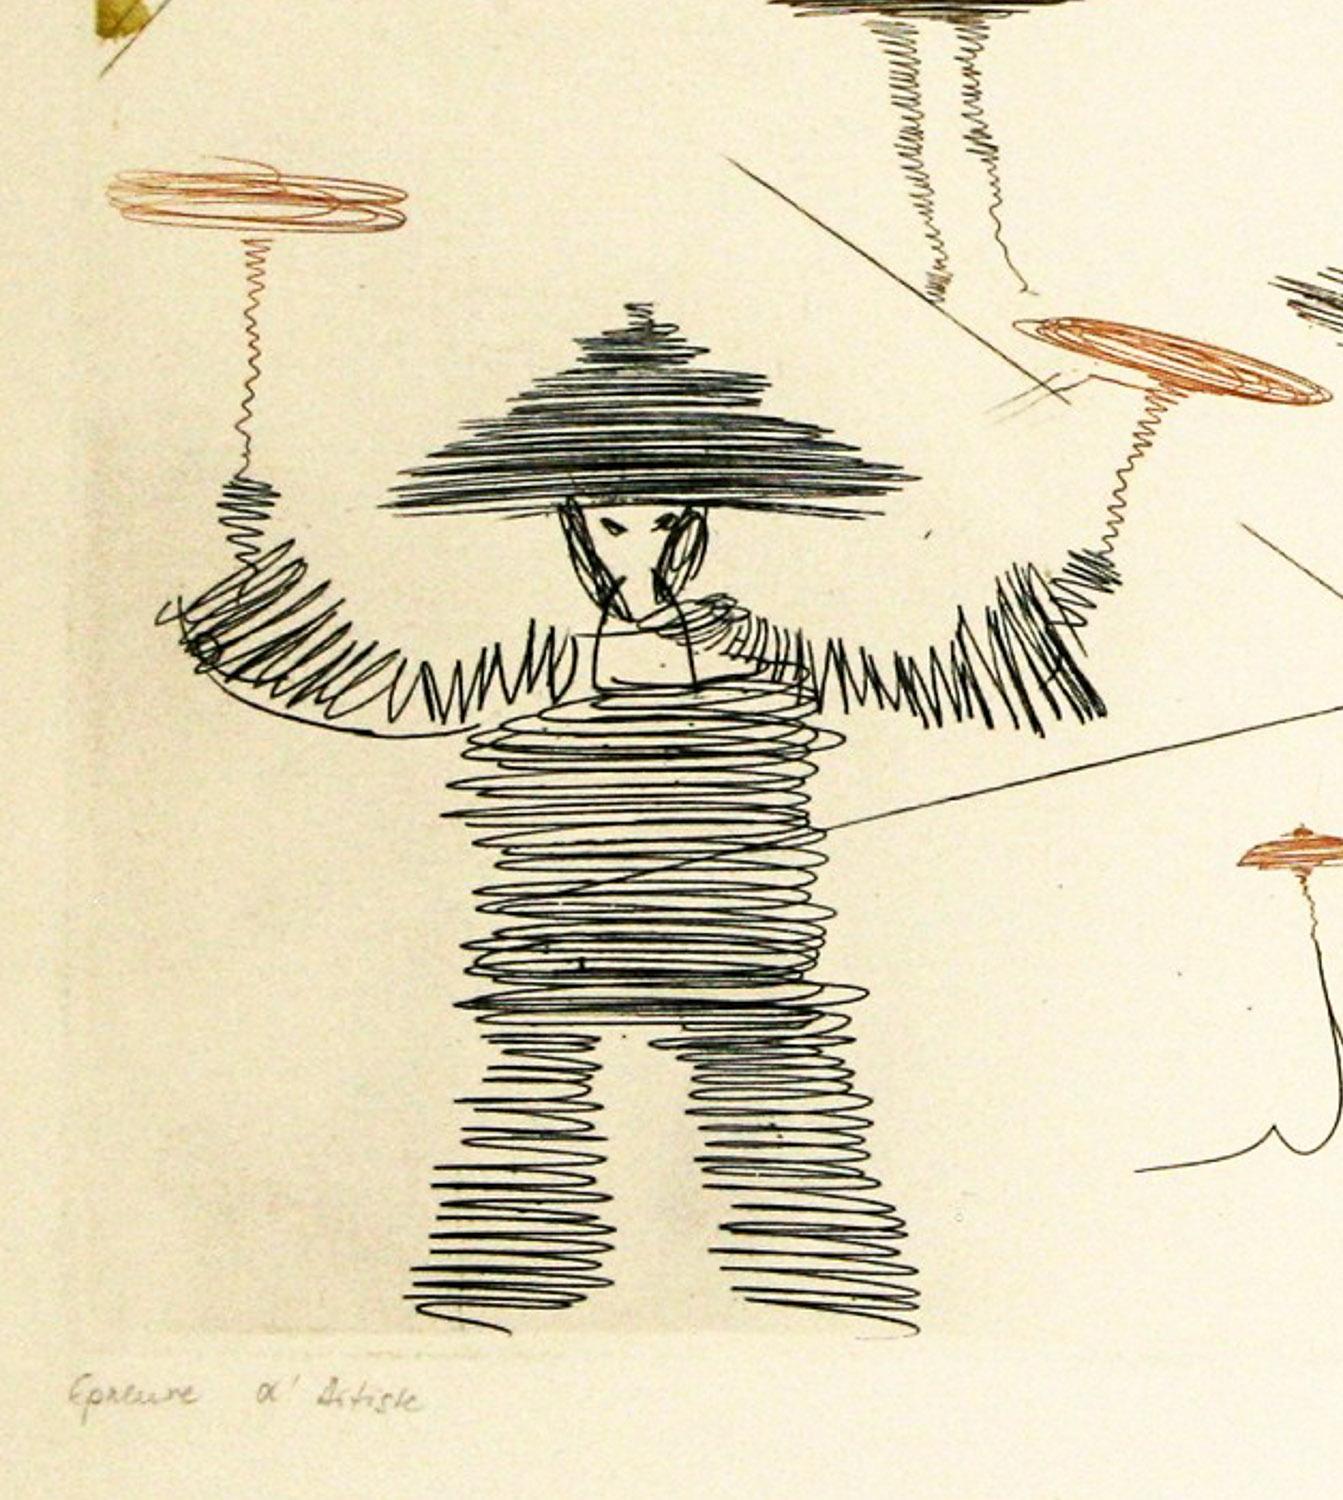 Chinois ( Theatre  Chinois ) etching by Salvador Dali – Print von Salvador Dalí